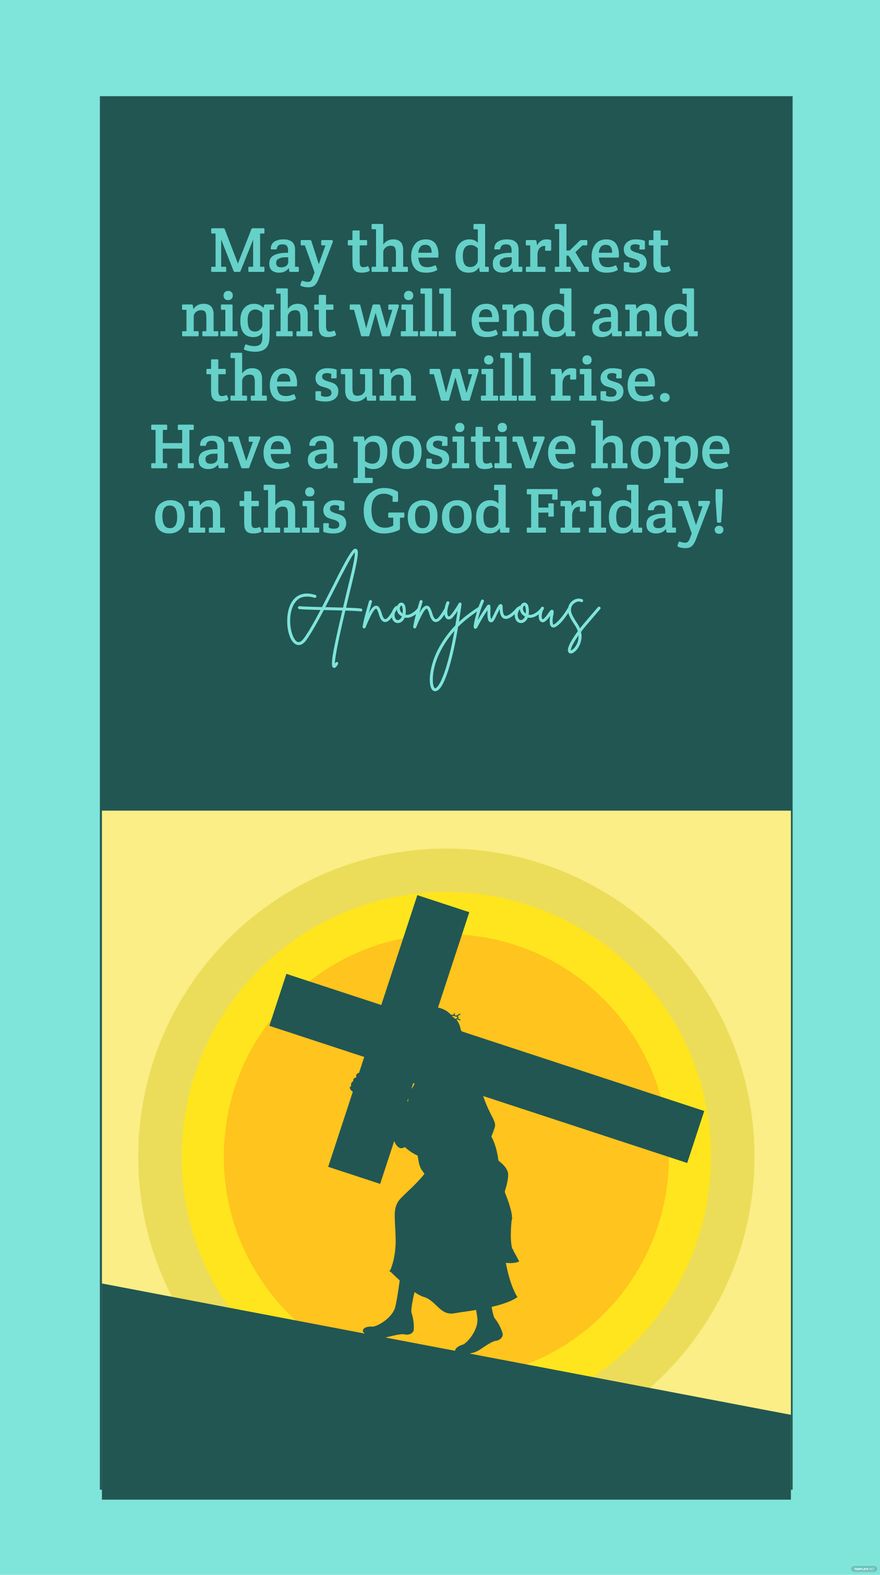 Anonymous - May the darkest night will end and the sun will rise. Have a positive hope on this Good Friday! in JPG